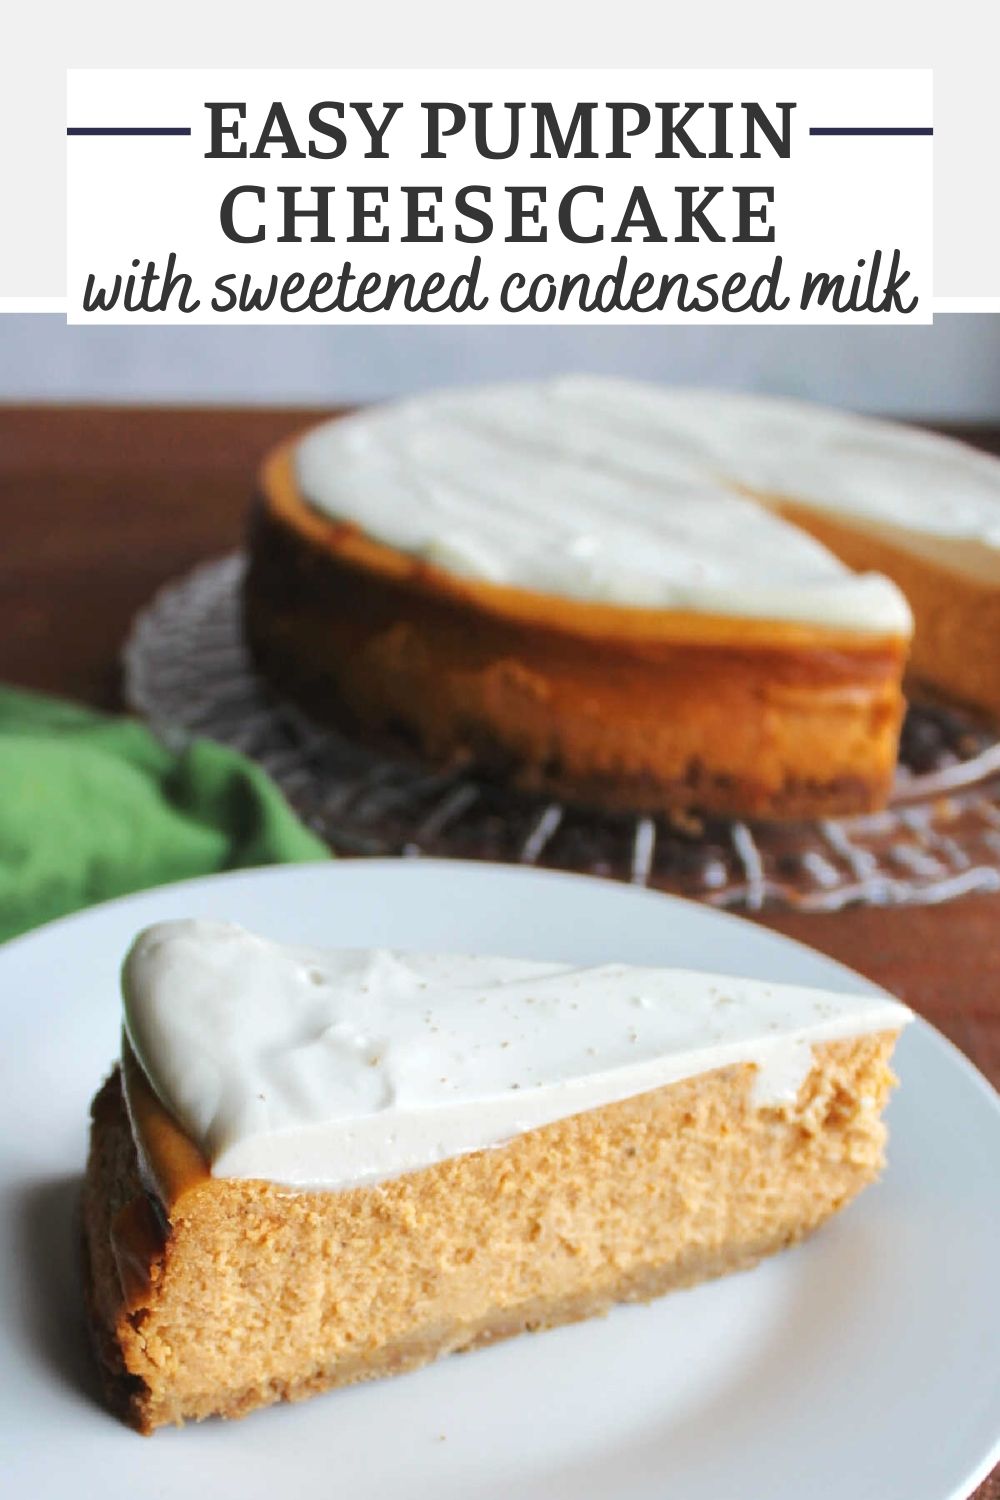 If you are looking for the perfect creamy pumpkin cheesecake, you are in the right place. The cheesecake is easy to put together and the optional sour cream topping takes it to the next level.